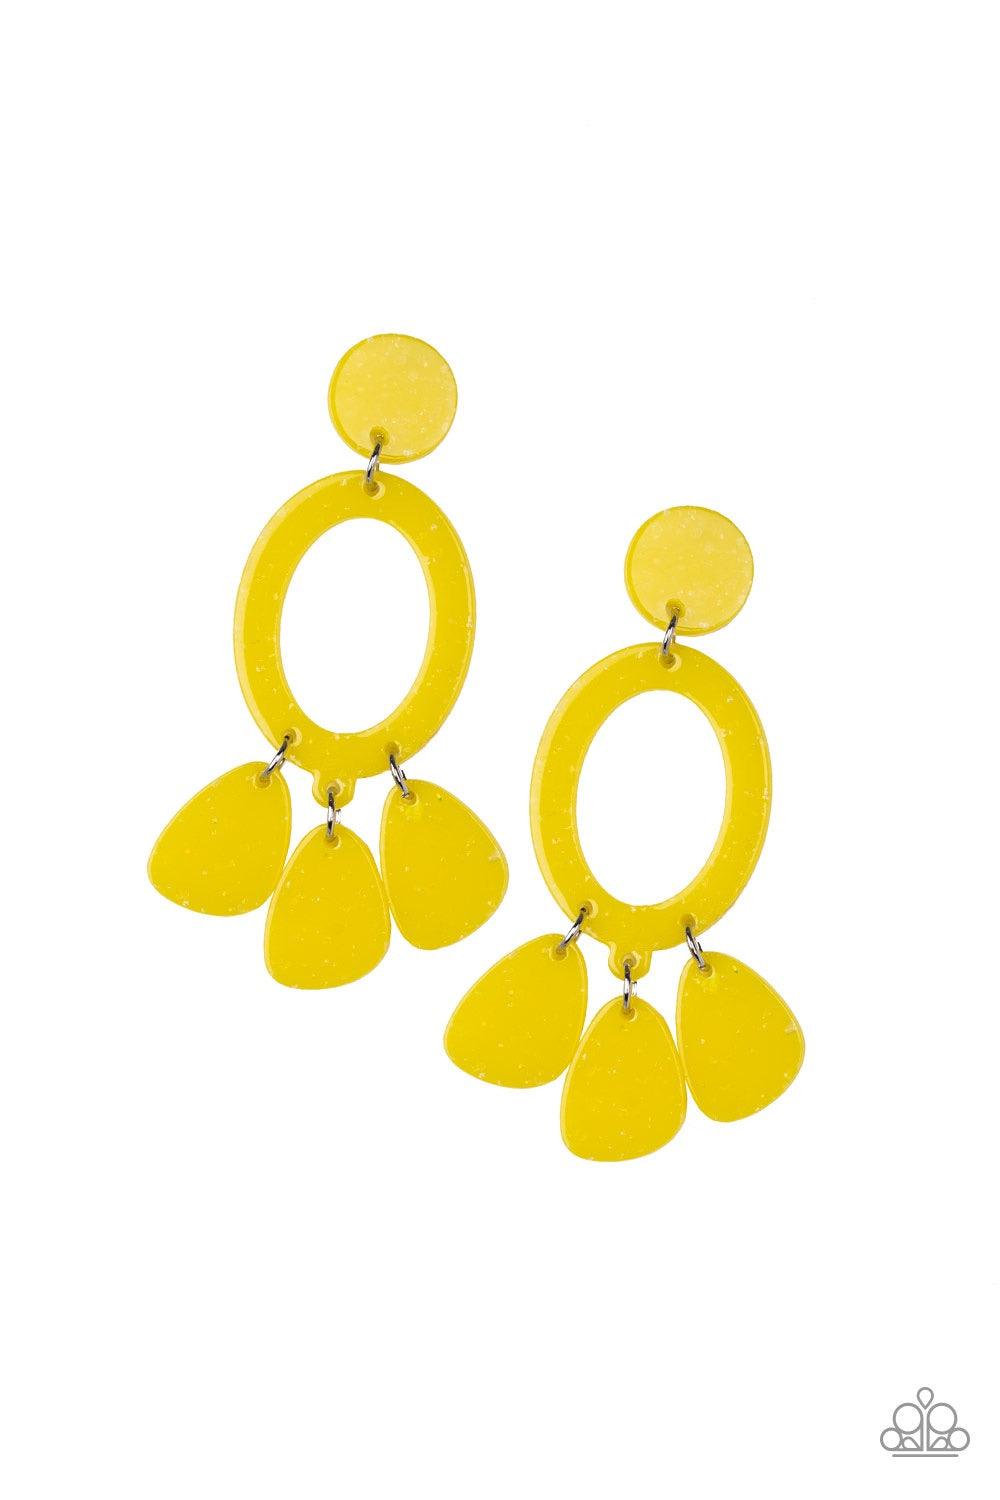 Paparazzi Accessories Sparkling Shores - Yellow Sparkle flecked yellow acrylic frames link into an abstract lure for a summery look. Earring attaches to a standard post fitting. Jewelry